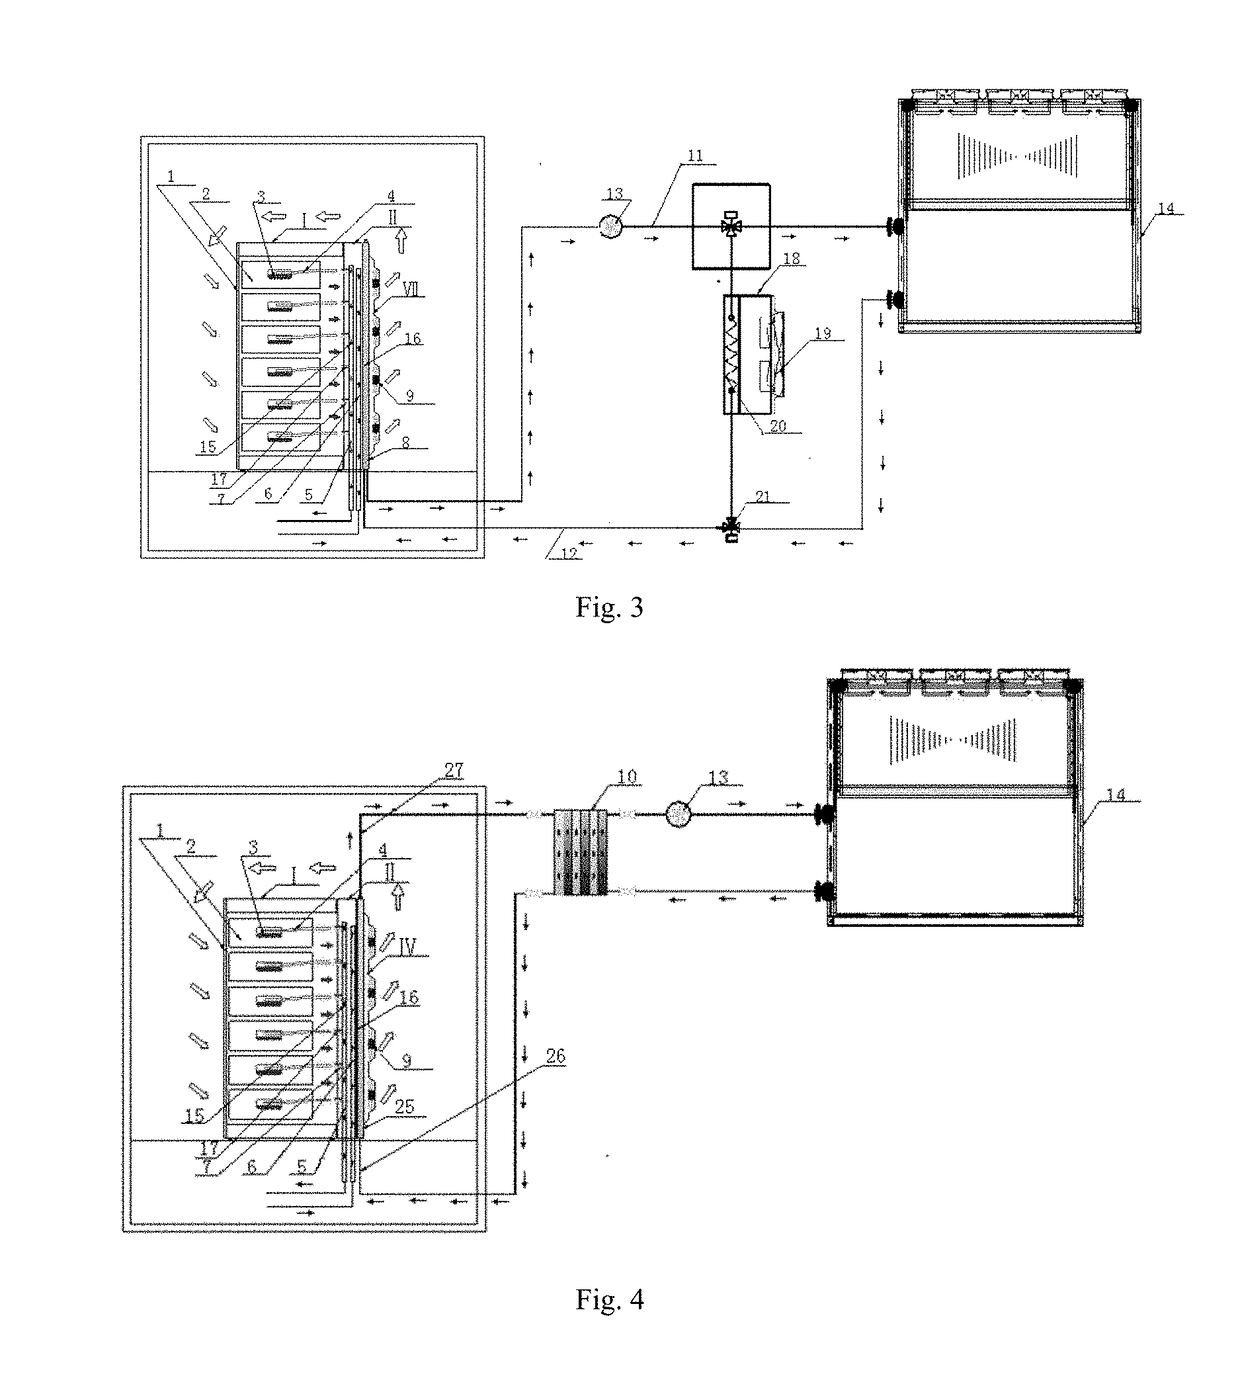 Server rack heat sink system with combination of liquid cooling device and auxiliary heat sink device